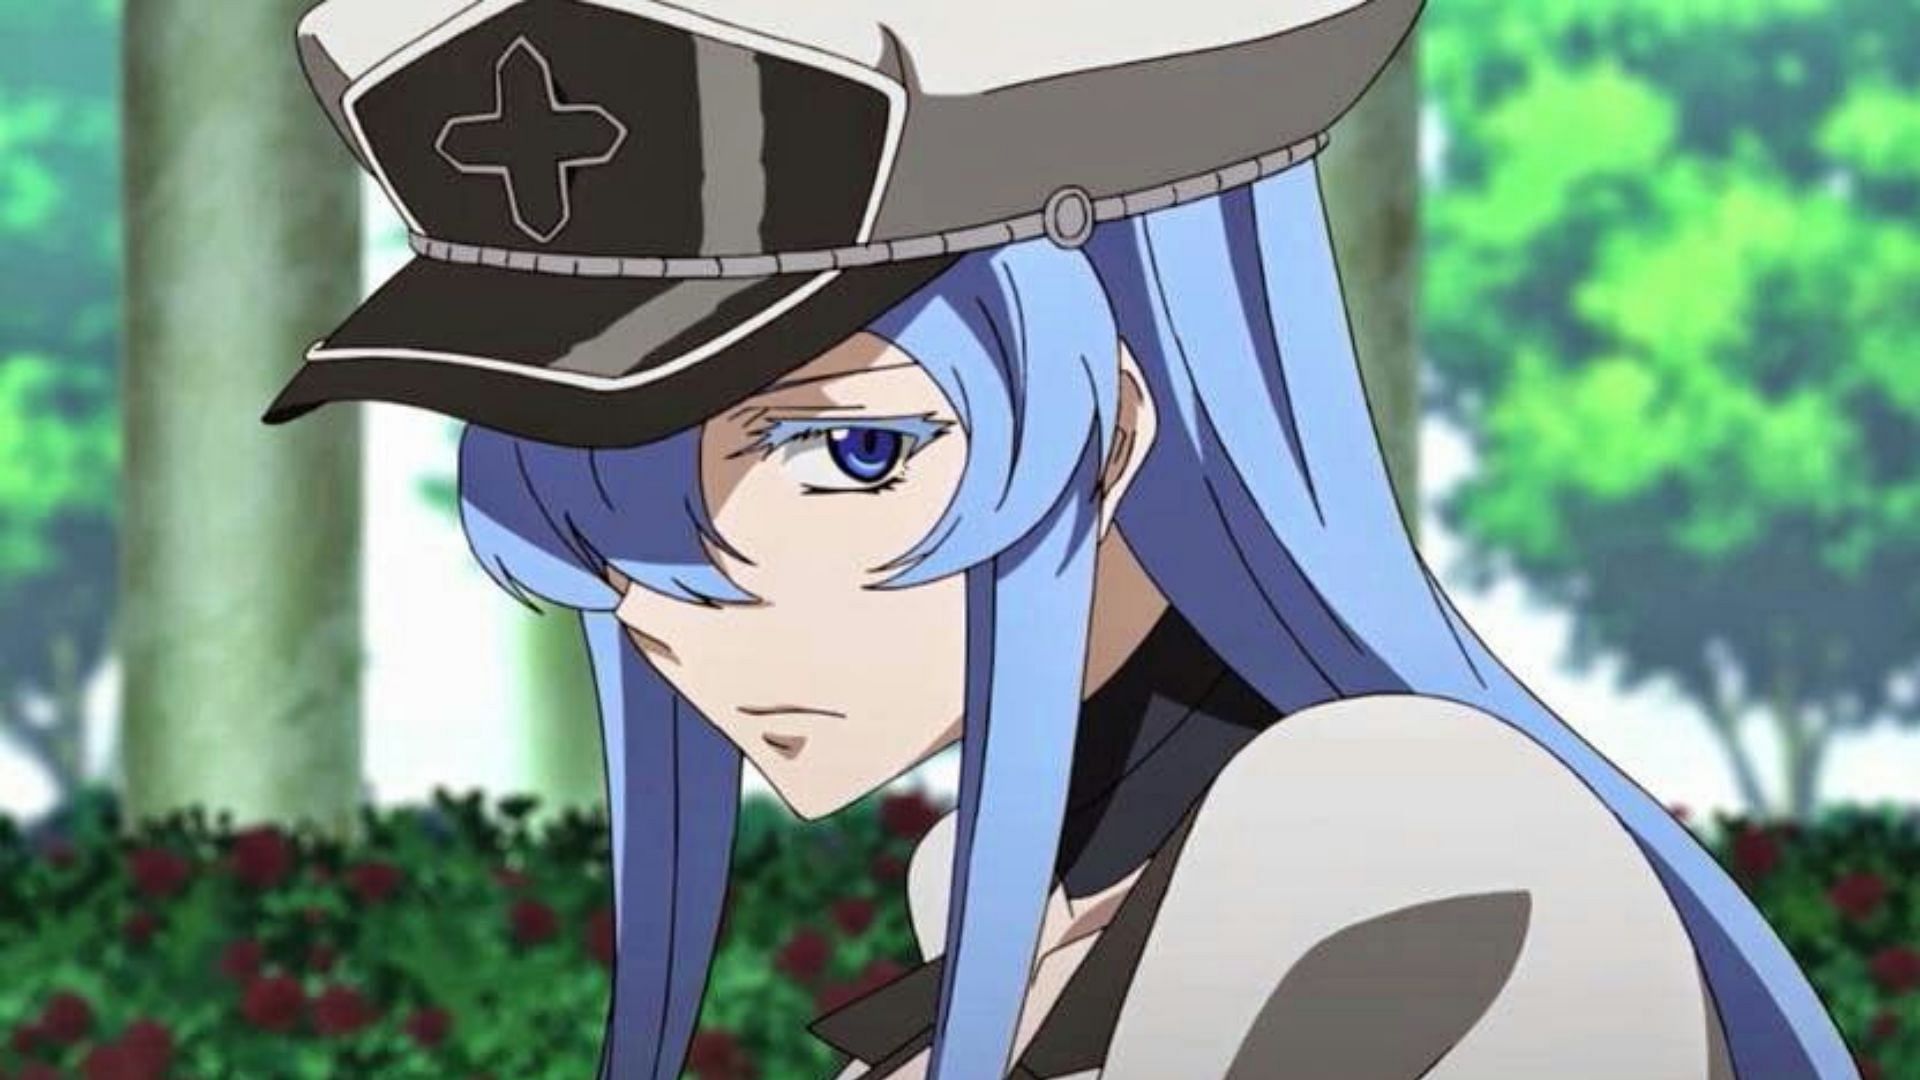 15 Most Interesting Female Anime Villains Ever BooksWide